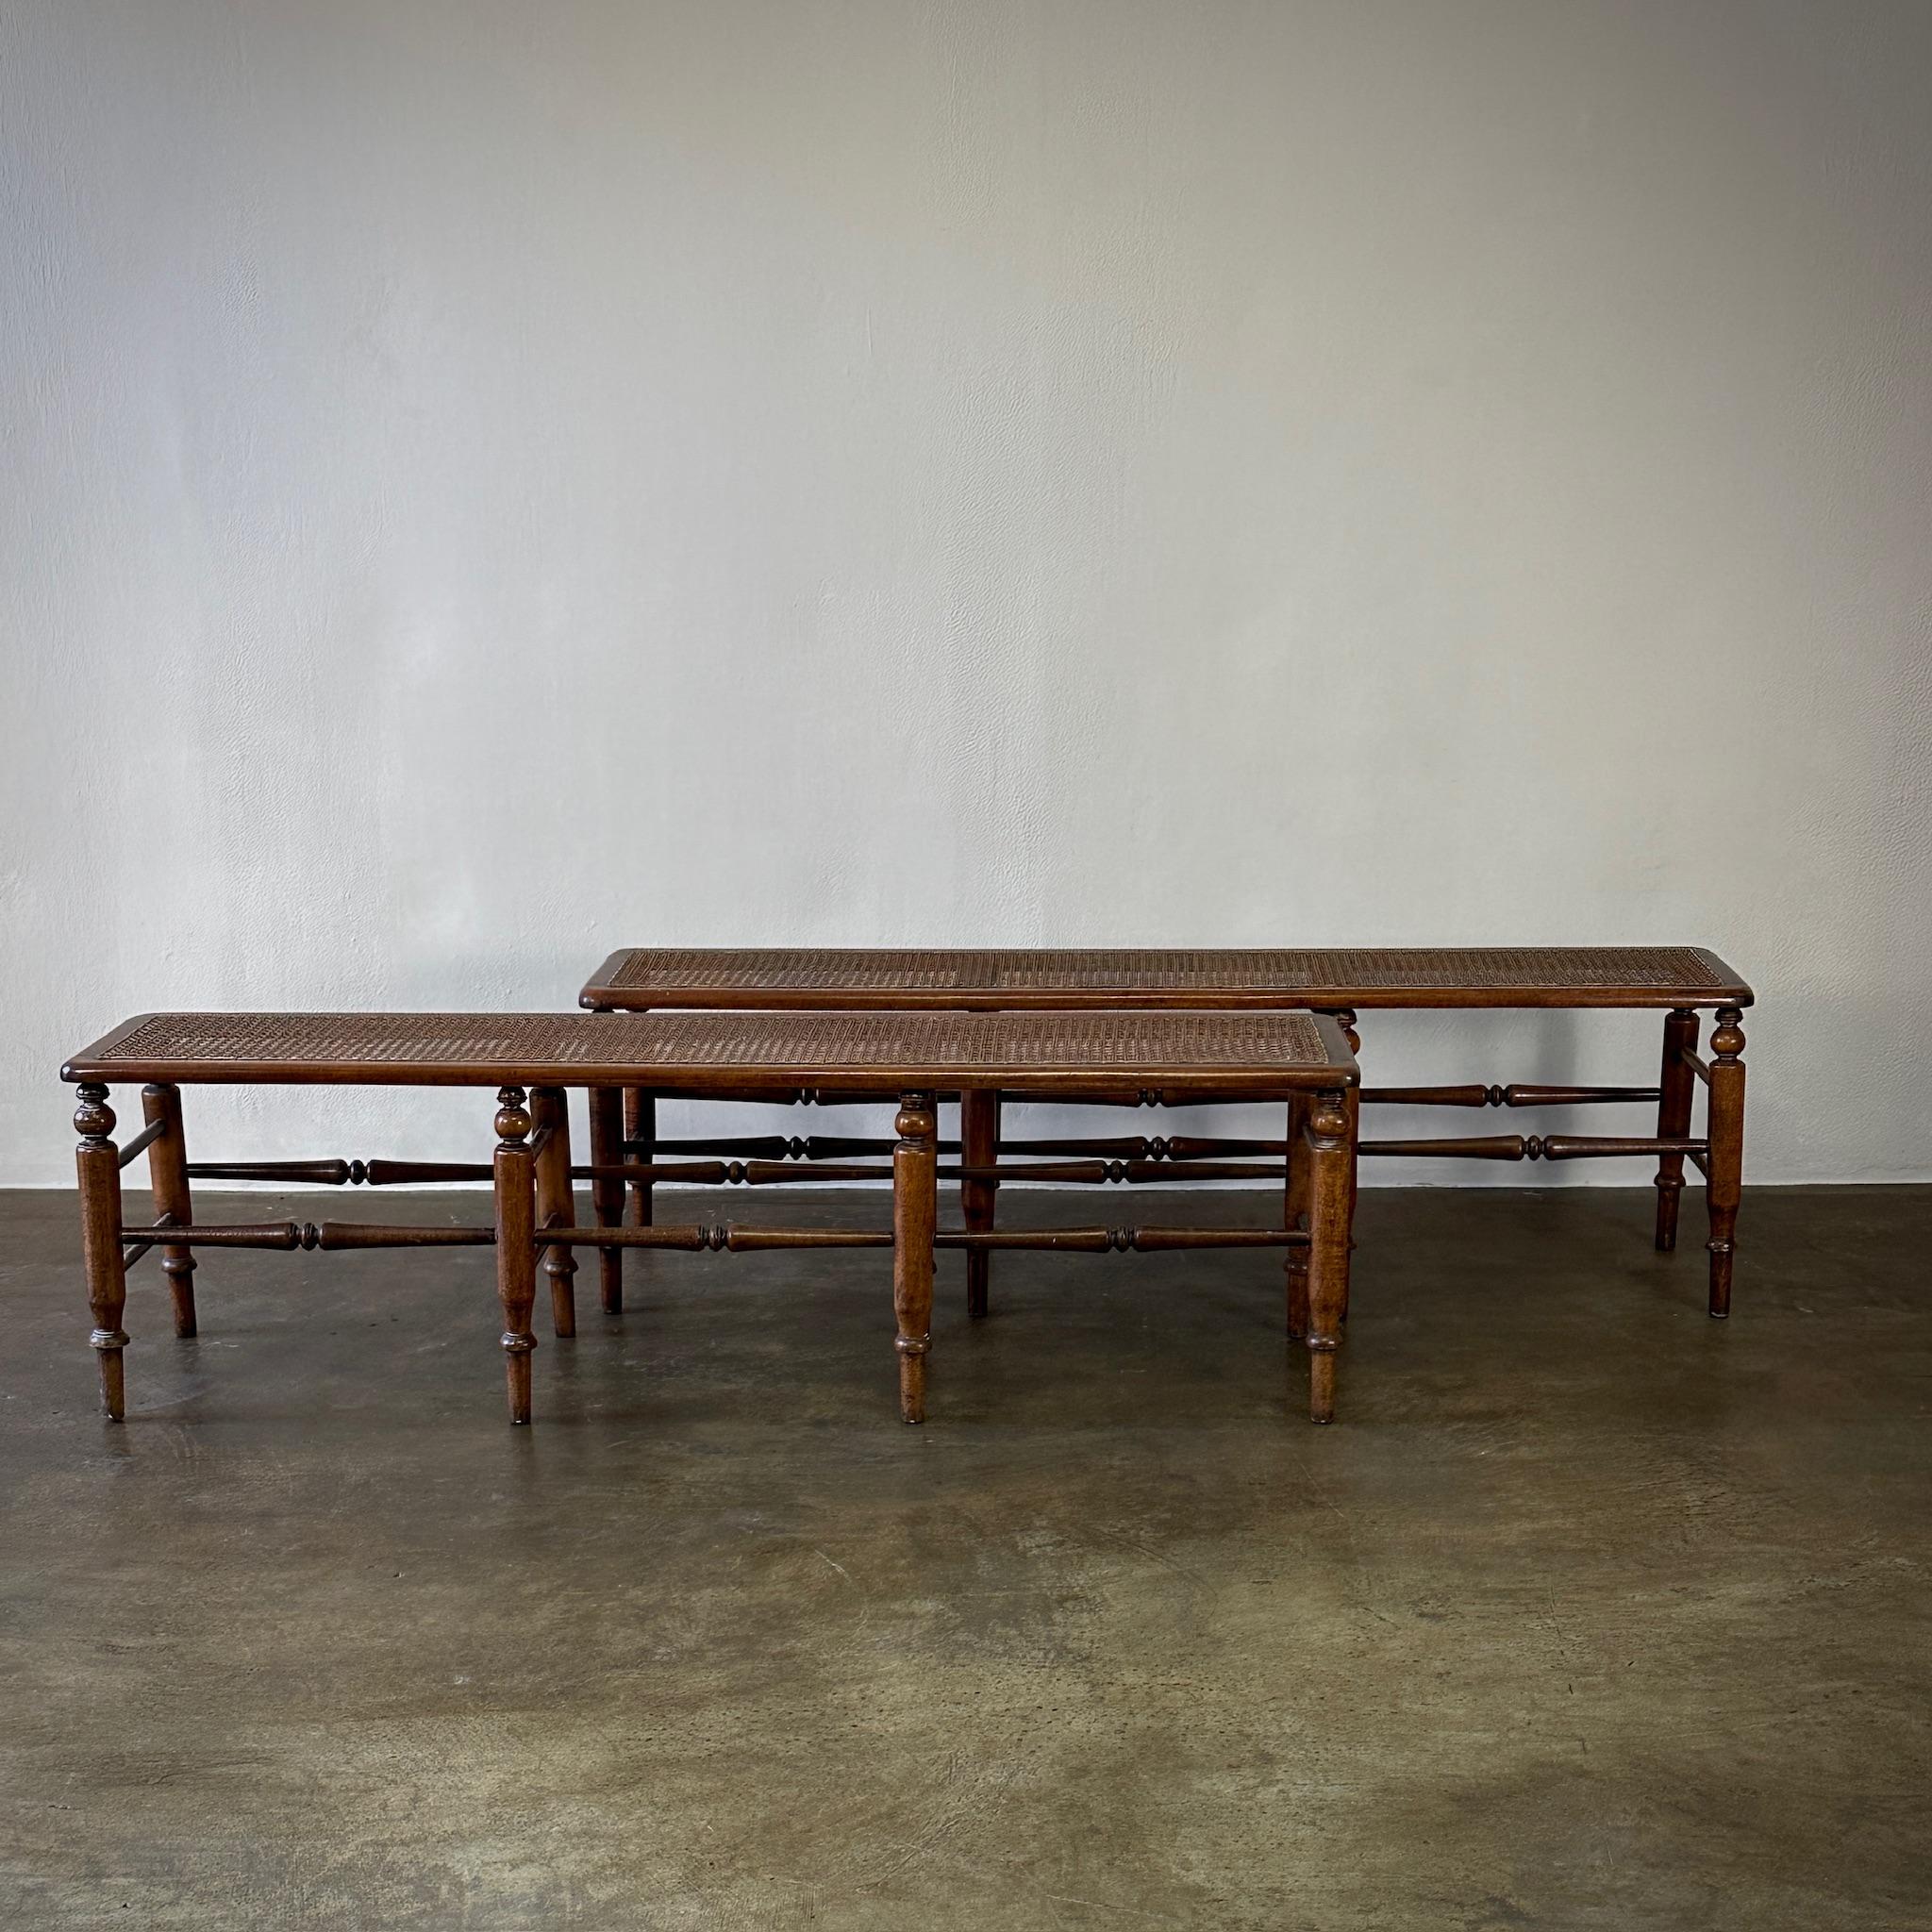 Pair of English 1860s mahogany benches with caned seats and ivory linen upholstered cushions. Would make a gracious addition to any bedroom or entry space. 

England, circa 1860

Dimensions: 60W x 12D x 17.5H